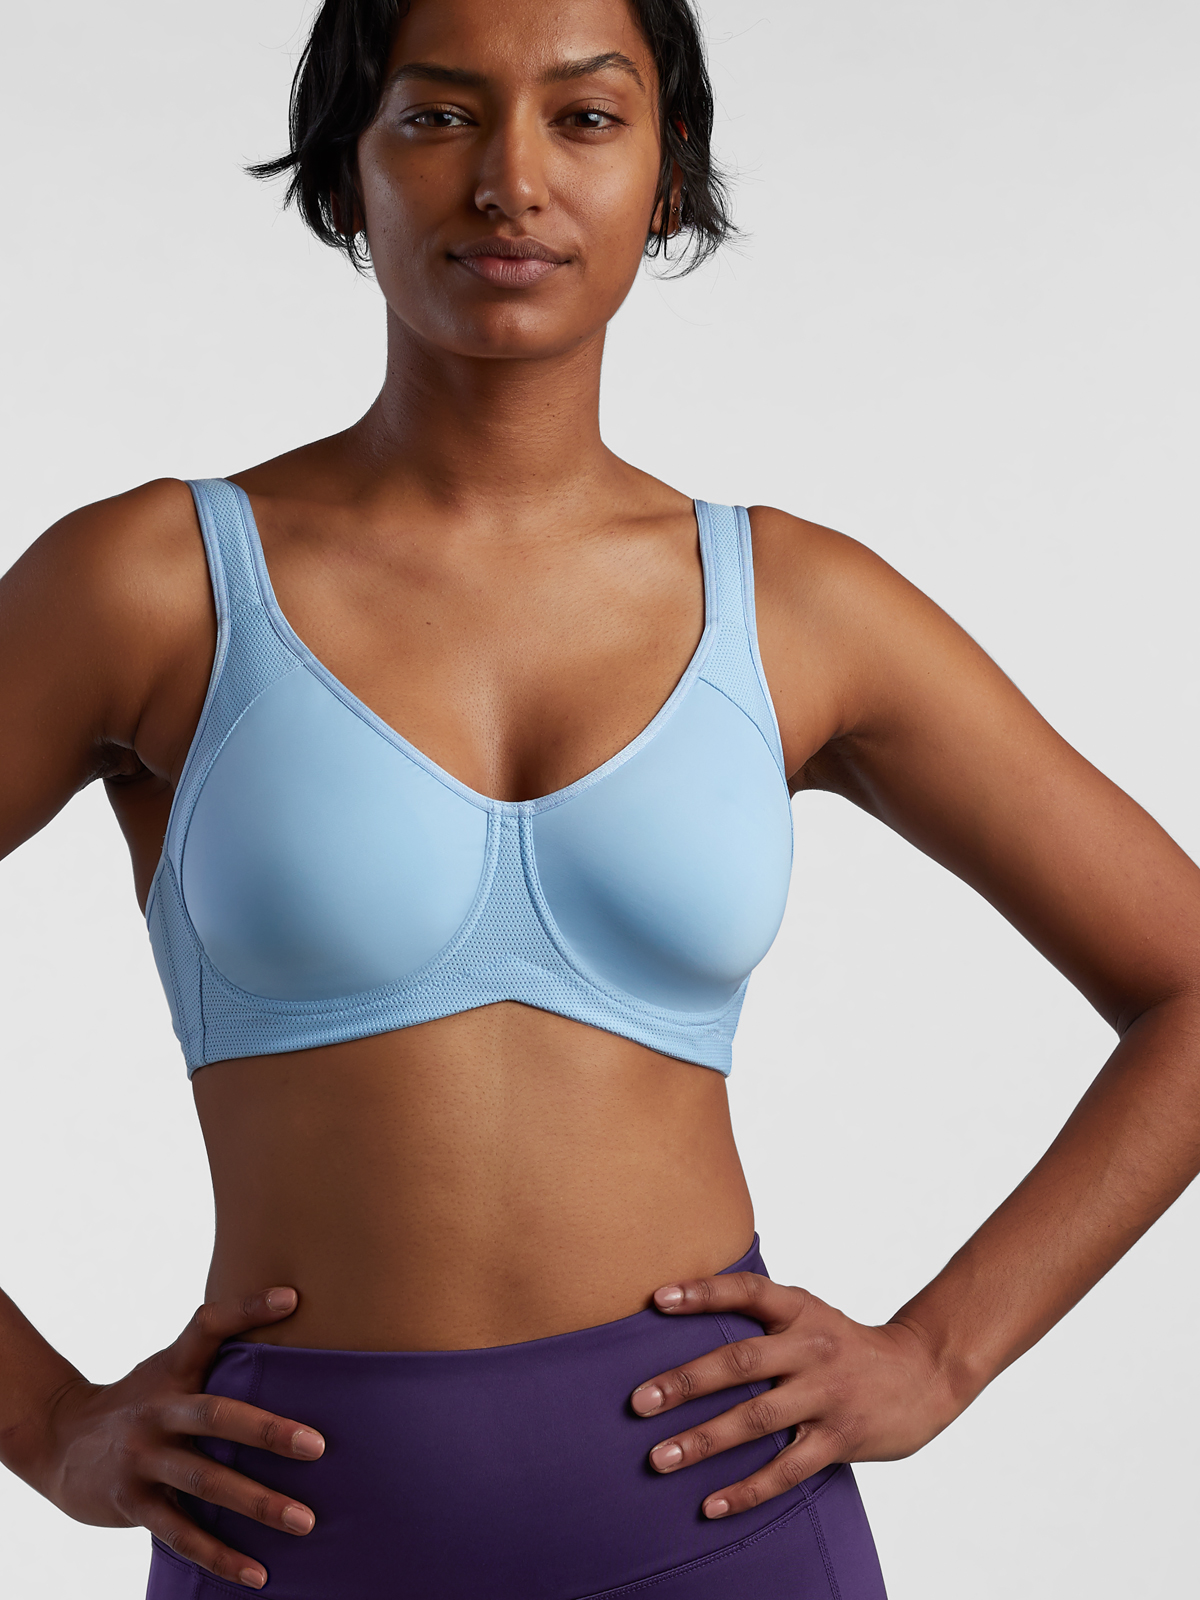 Our bras are super solid We have this beautiful bra available It's